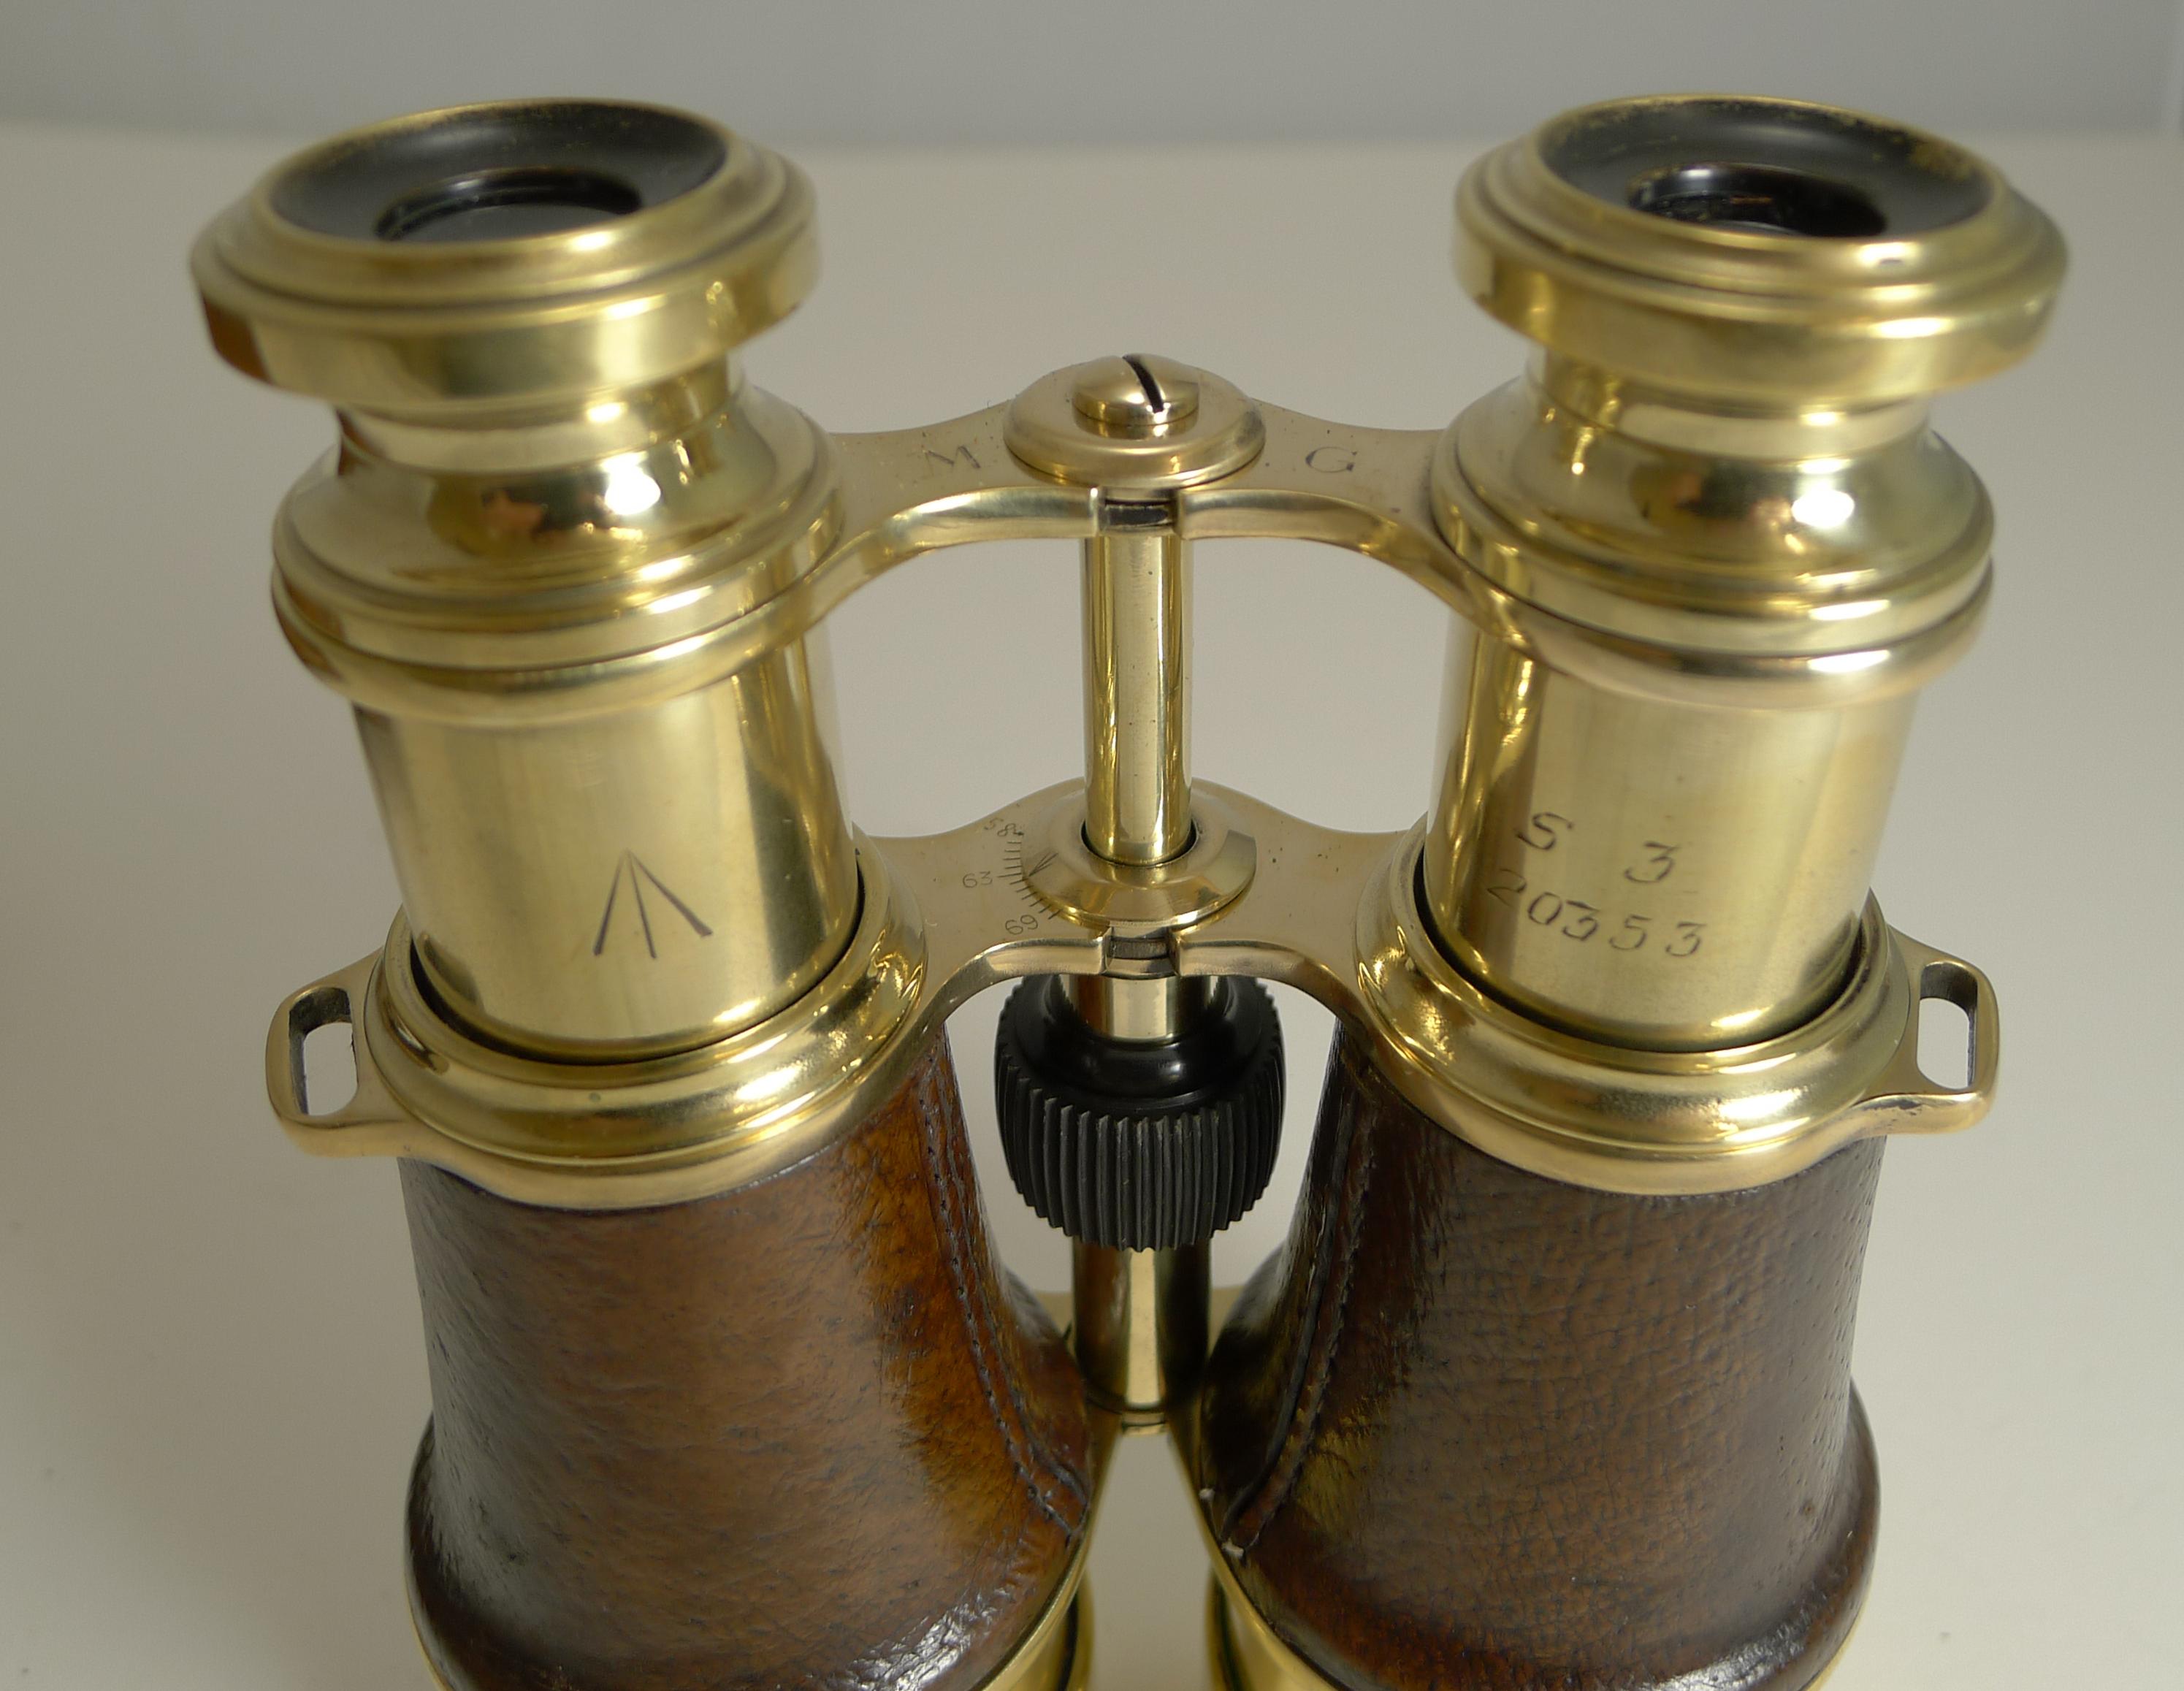 A fabulous pair of World War I British Officers Military binoculars with both the brass on the binoculars and the leather case with the British military crows foot mark. The case is also stamped with the London retailer 